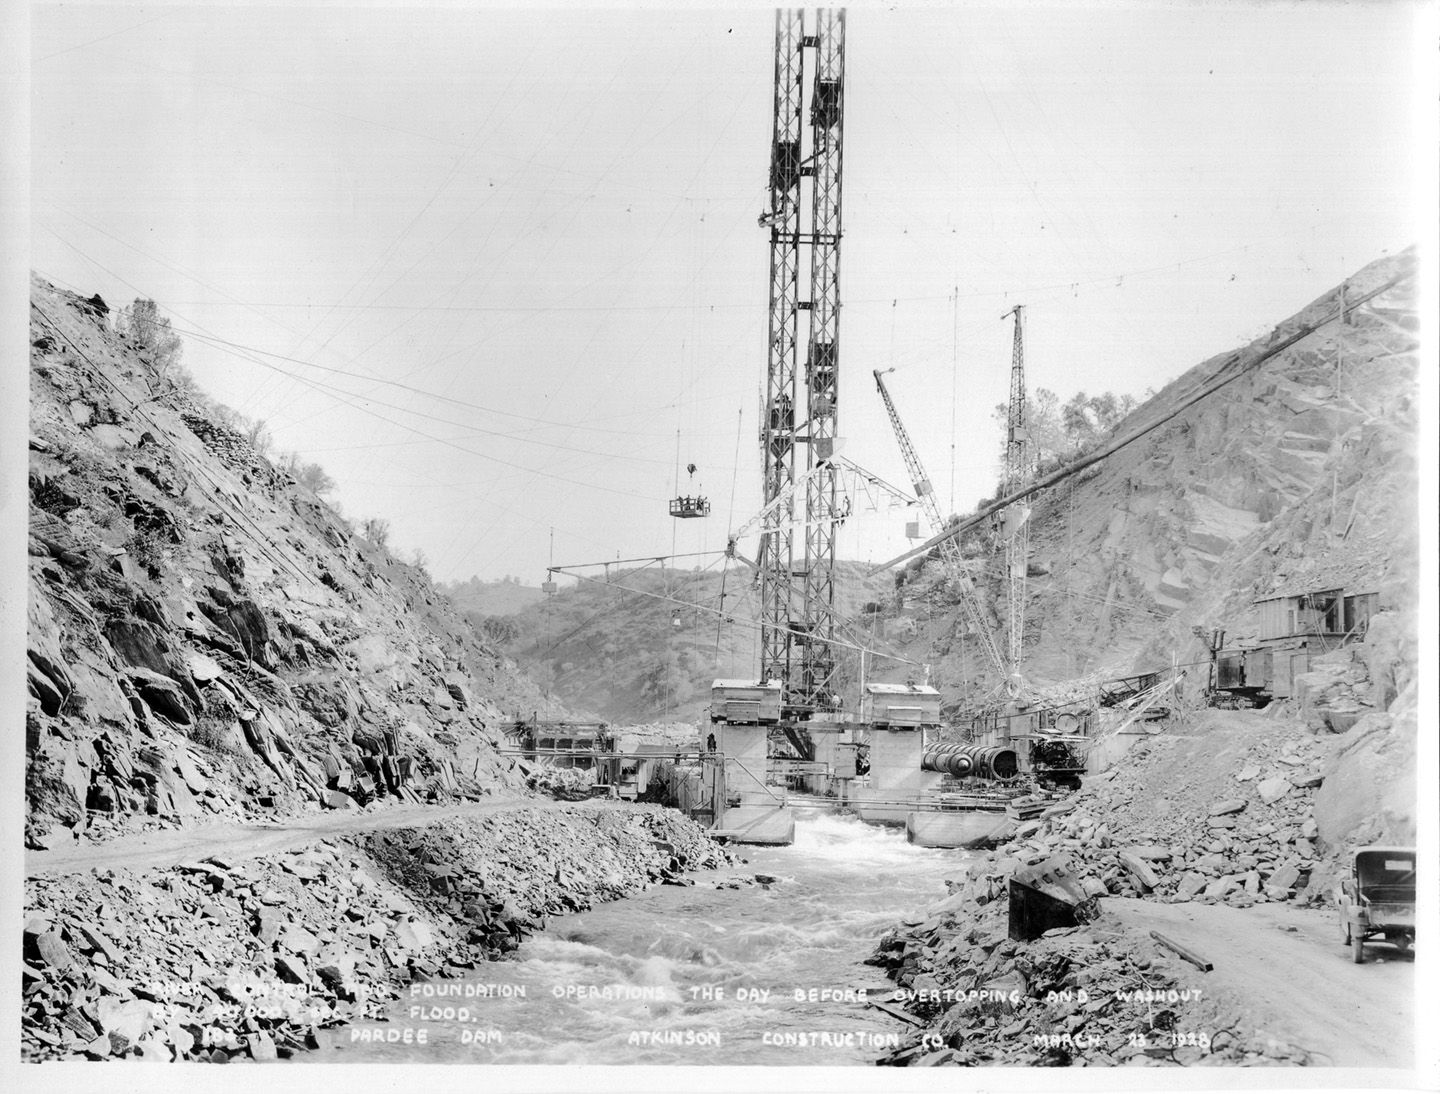 River control foundation operations the day before overtopping and washout 40,000 sec. ft. flood. (1928)	